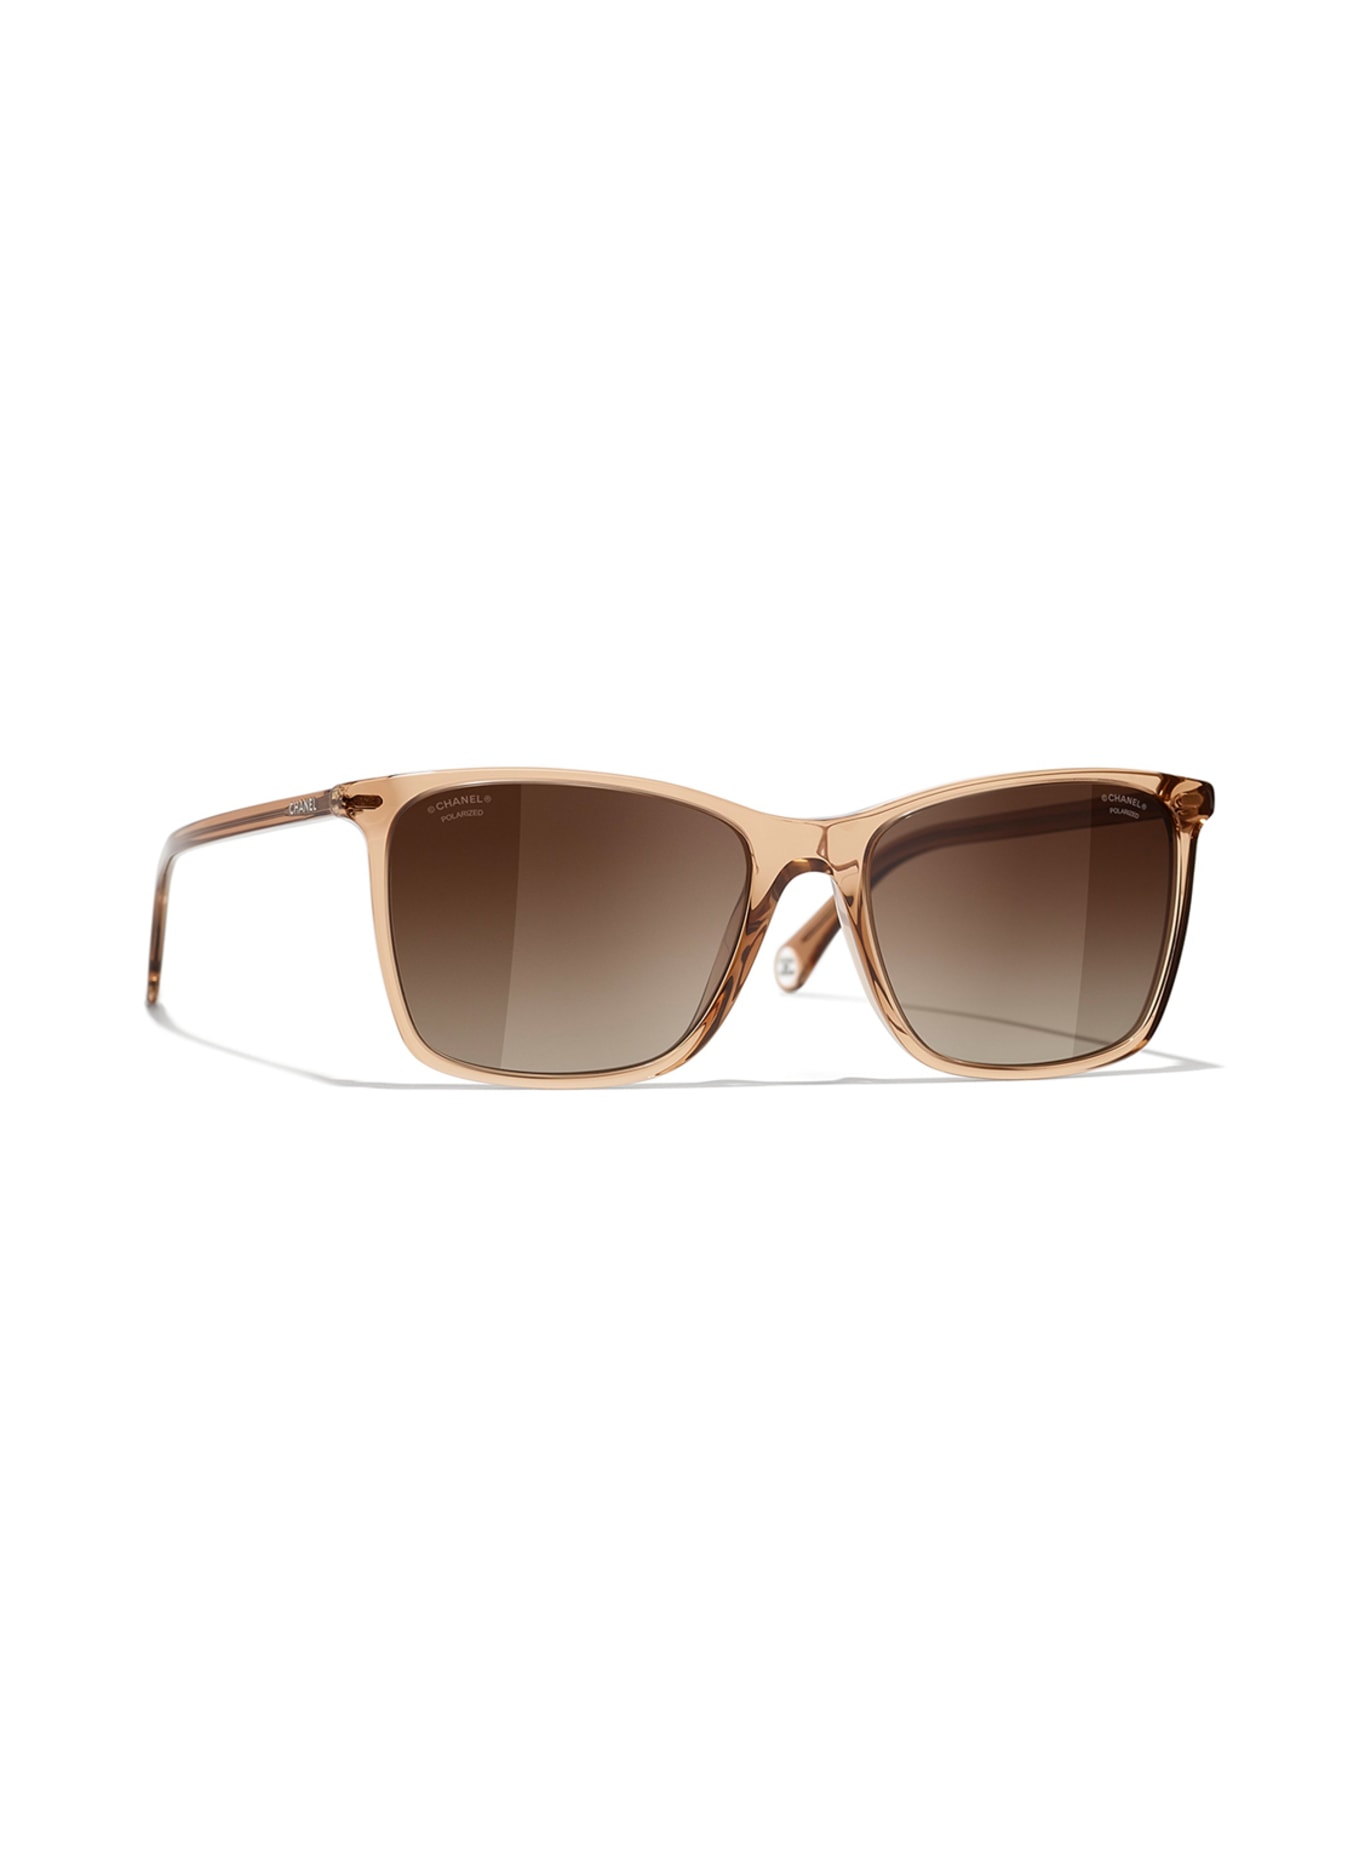 CHANEL Square sunglasses, Color: BROWN/BROWN GRADIENT (Image 1)